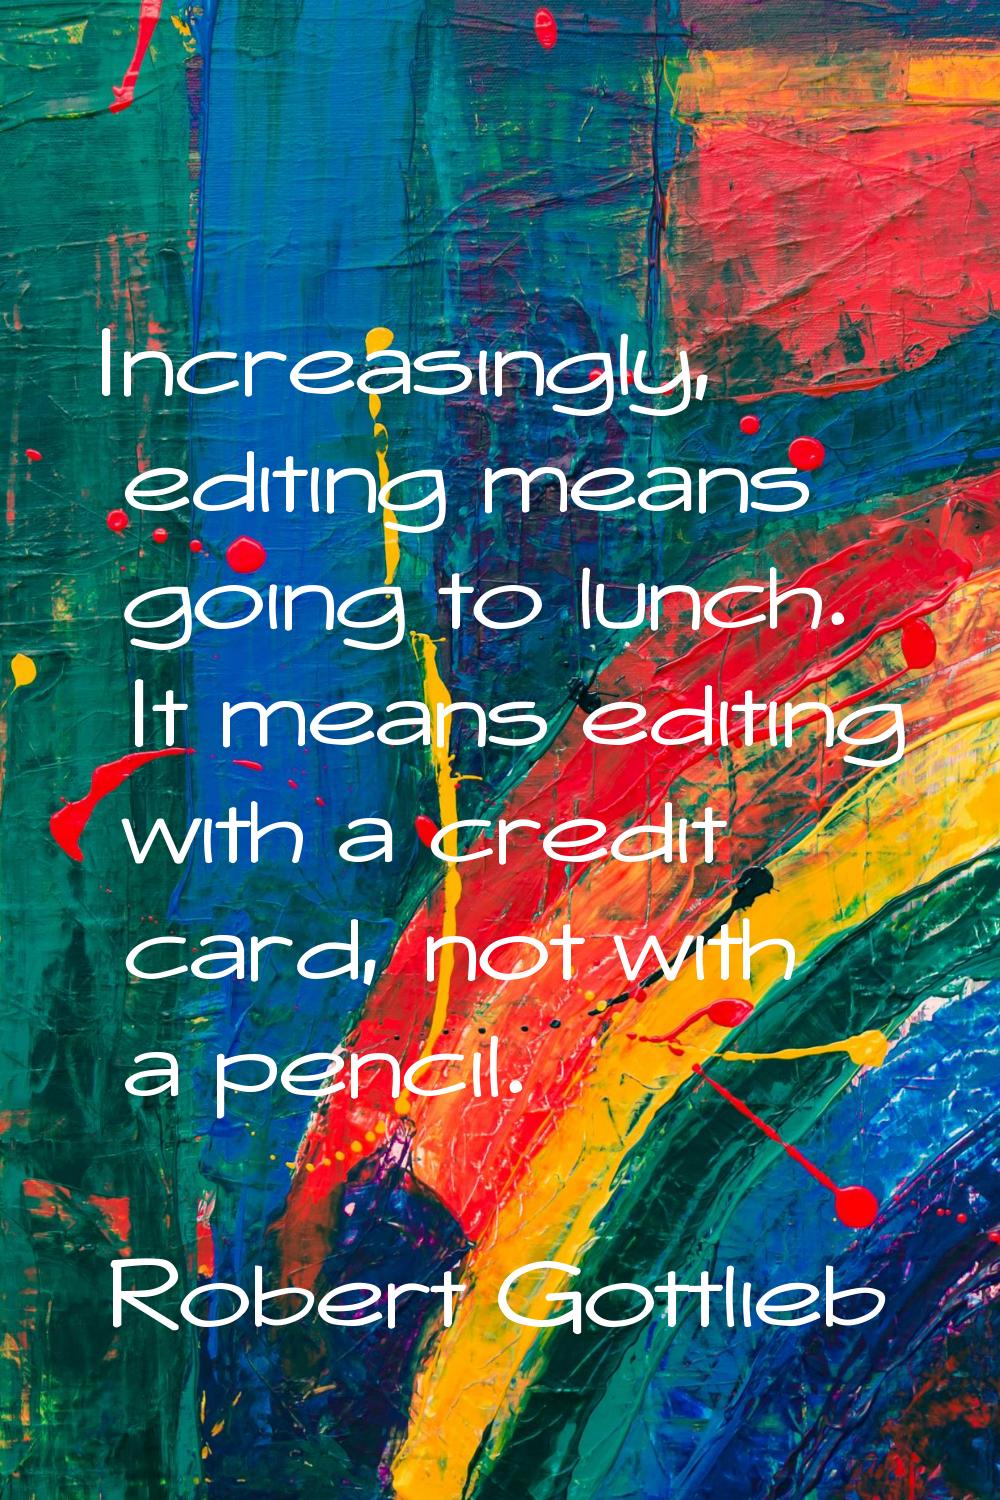 Increasingly, editing means going to lunch. It means editing with a credit card, not with a pencil.